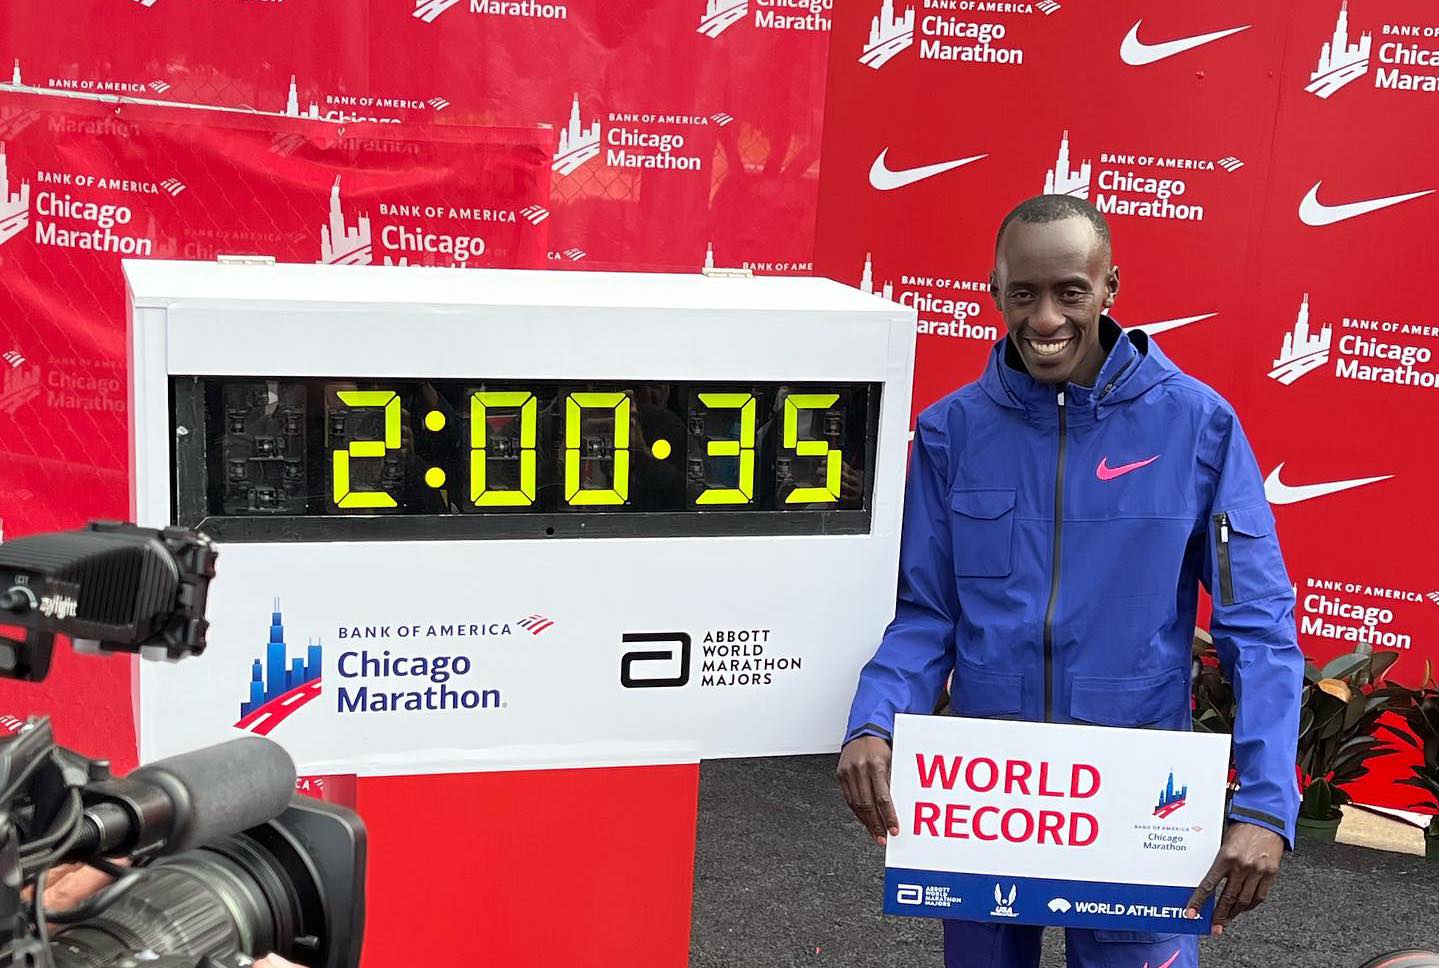 Kenyan athlete bags new world record in Chicago